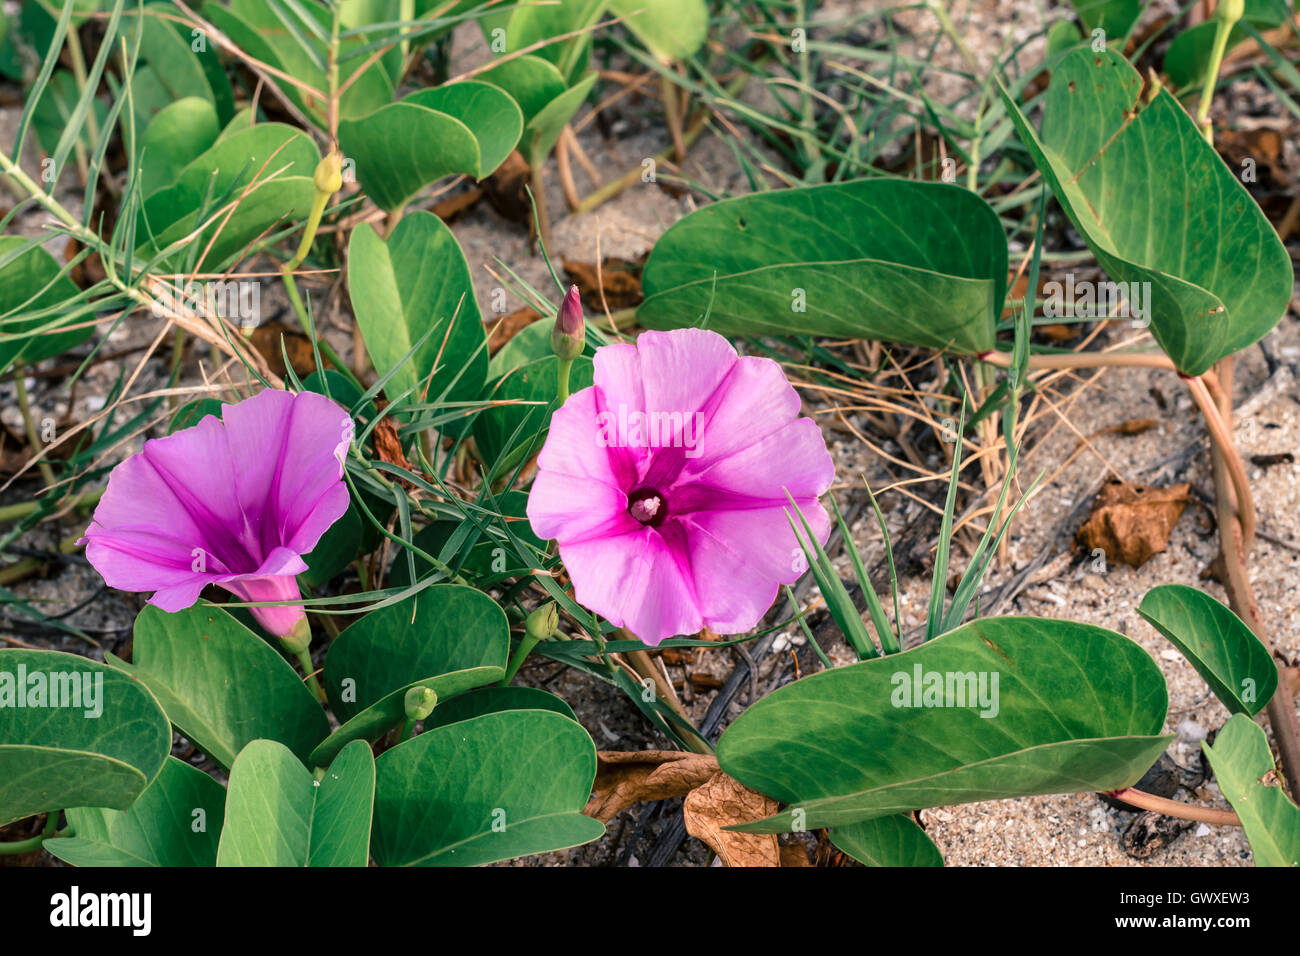 Morning Glory flower species found along the beach Stock Photo